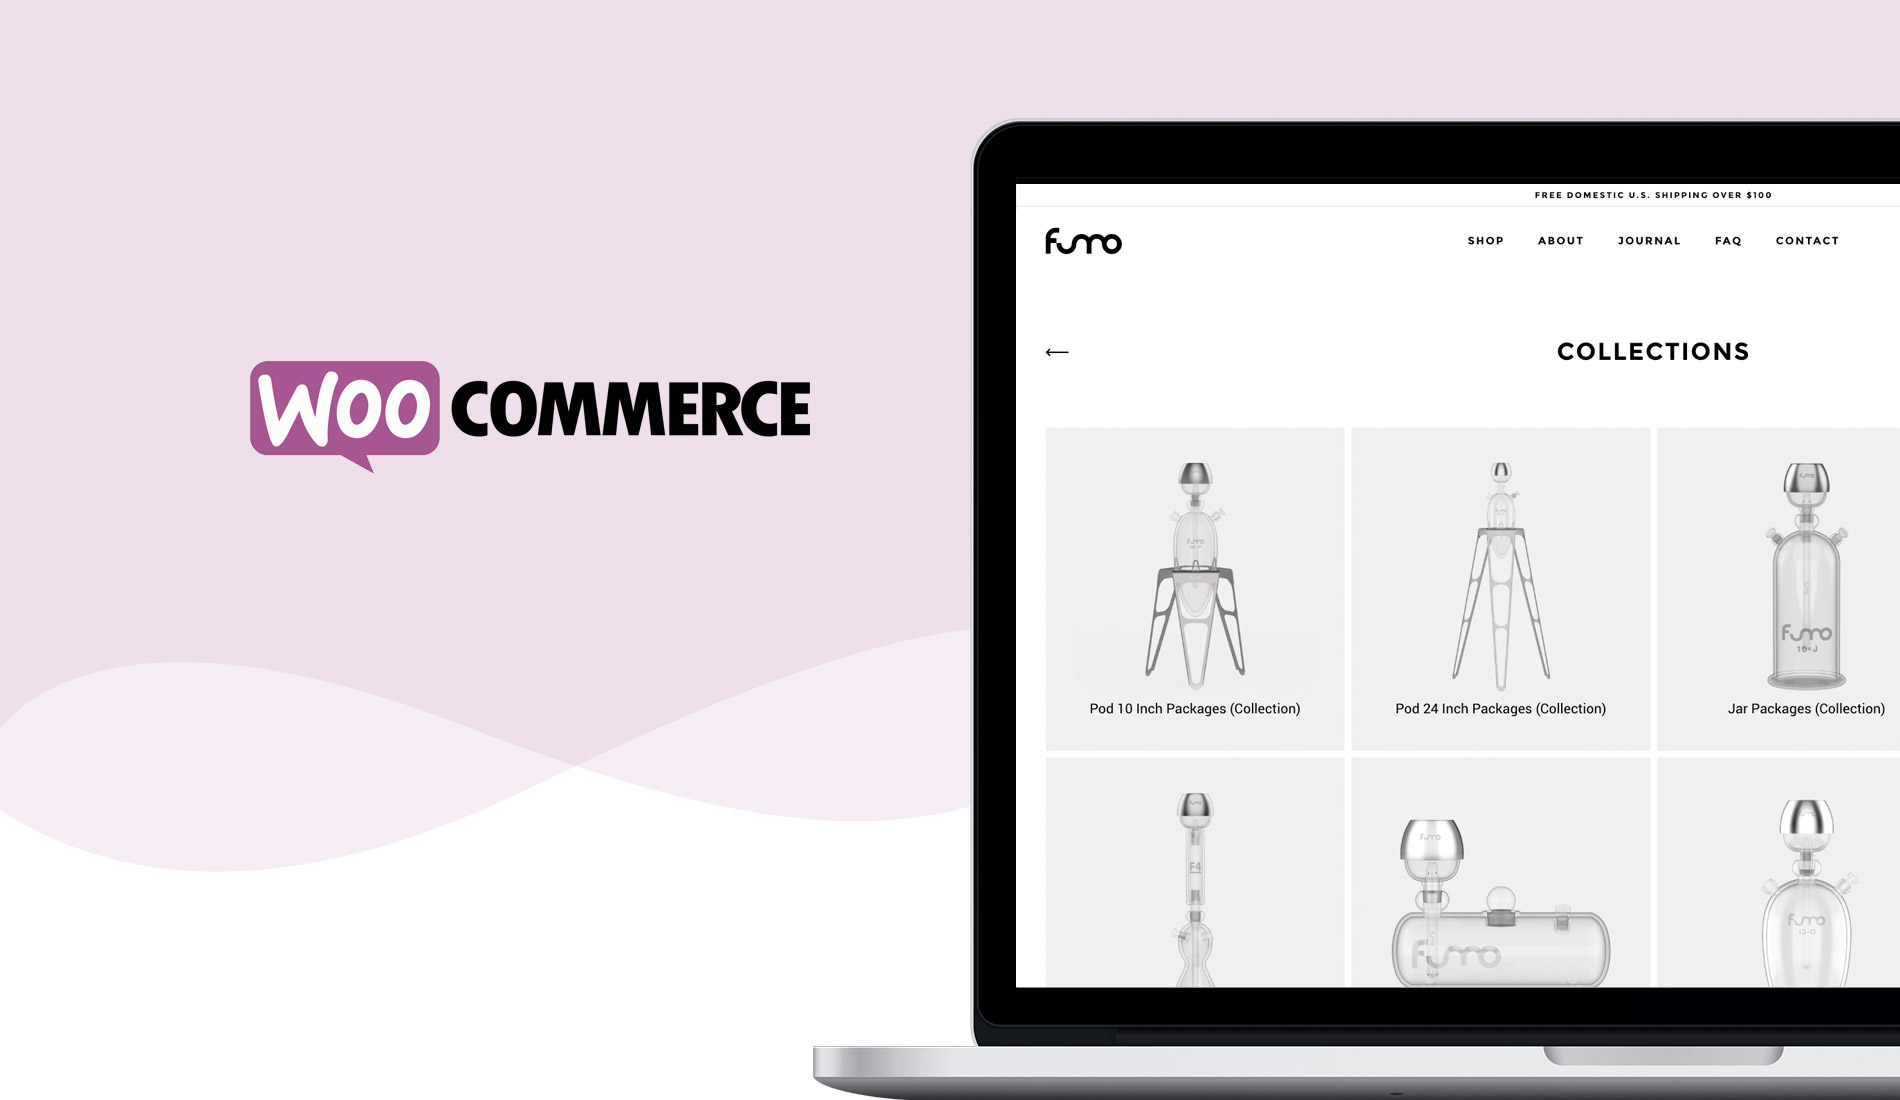 Fumo WooCommerce Shop designed and built by London web design agency Fhoke.